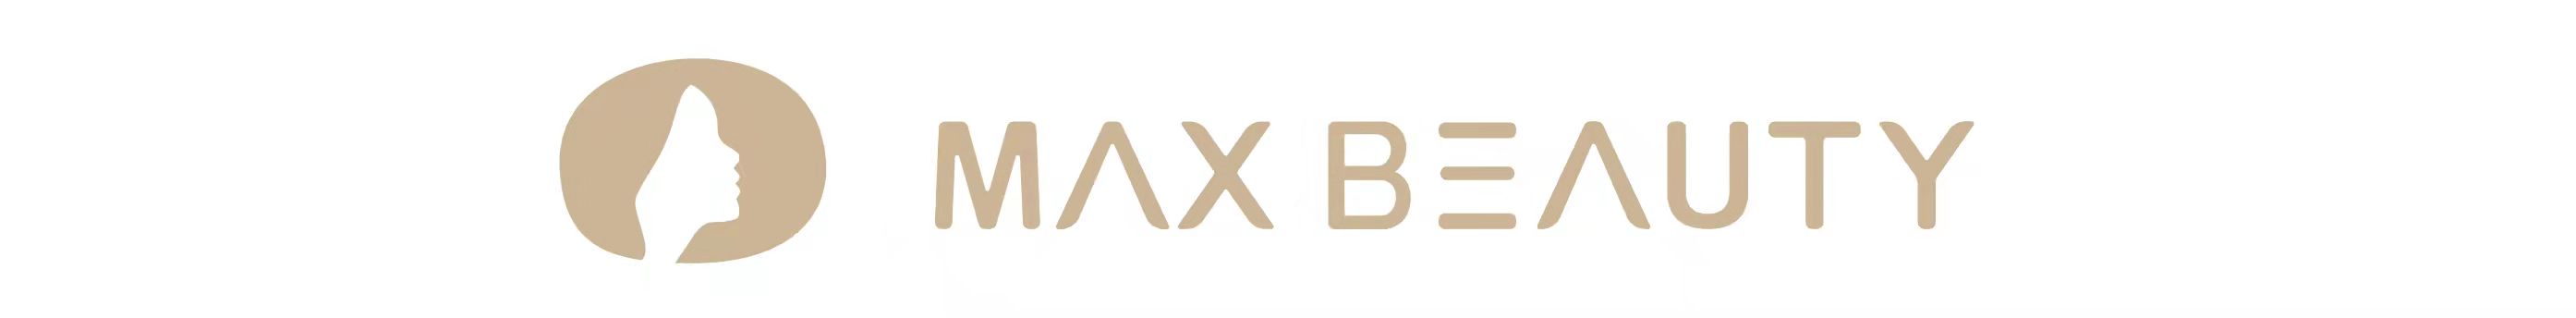 Max beauty equipment limited 